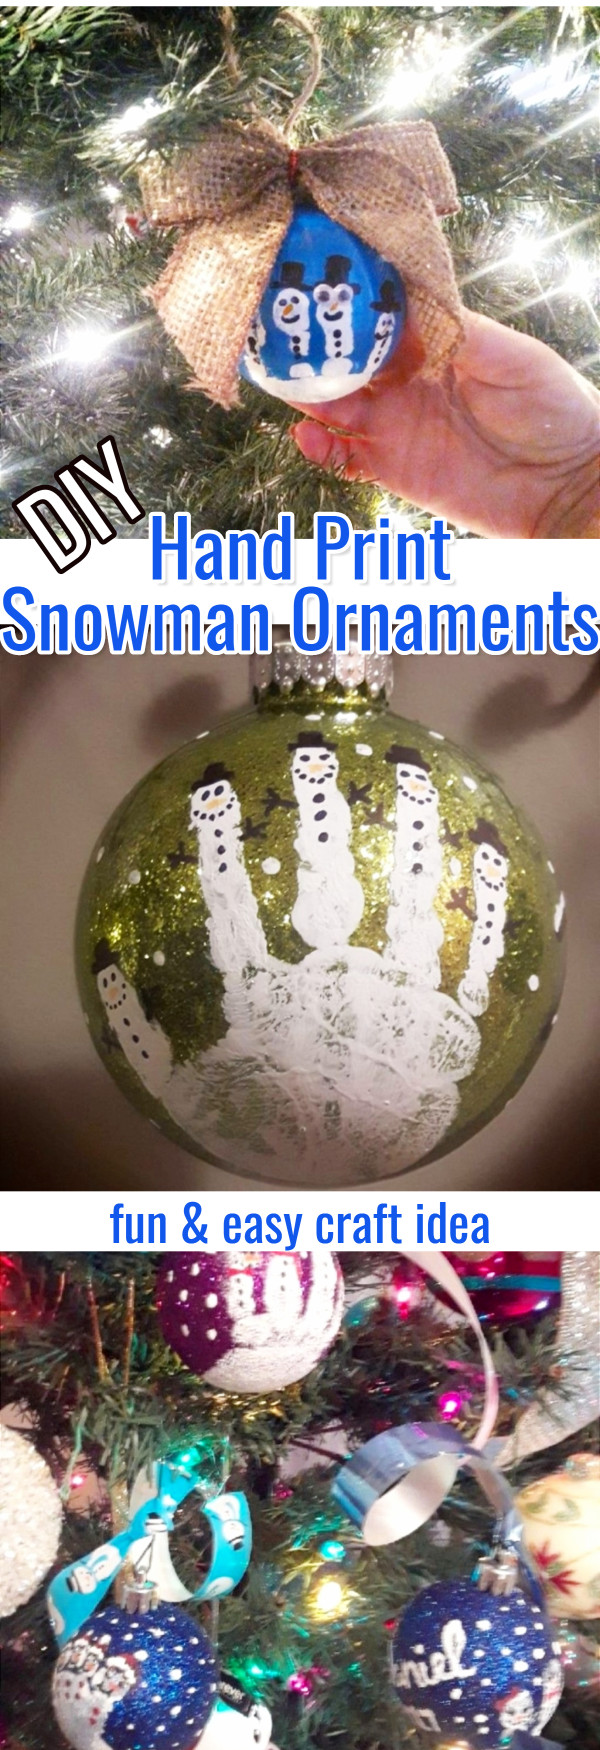 Easy Hand Print Christmas Ornaments To Make - DIY Christmas Ornaments • Family Fingerprint Ornament • Easy Christmas Ornaments to Make • DIY XMas Ornaments • DIY Christmas Crafts • Hand Print Snowman Ornaments • DIY Ornaments for Grandparents • Kids Christmas Crafts